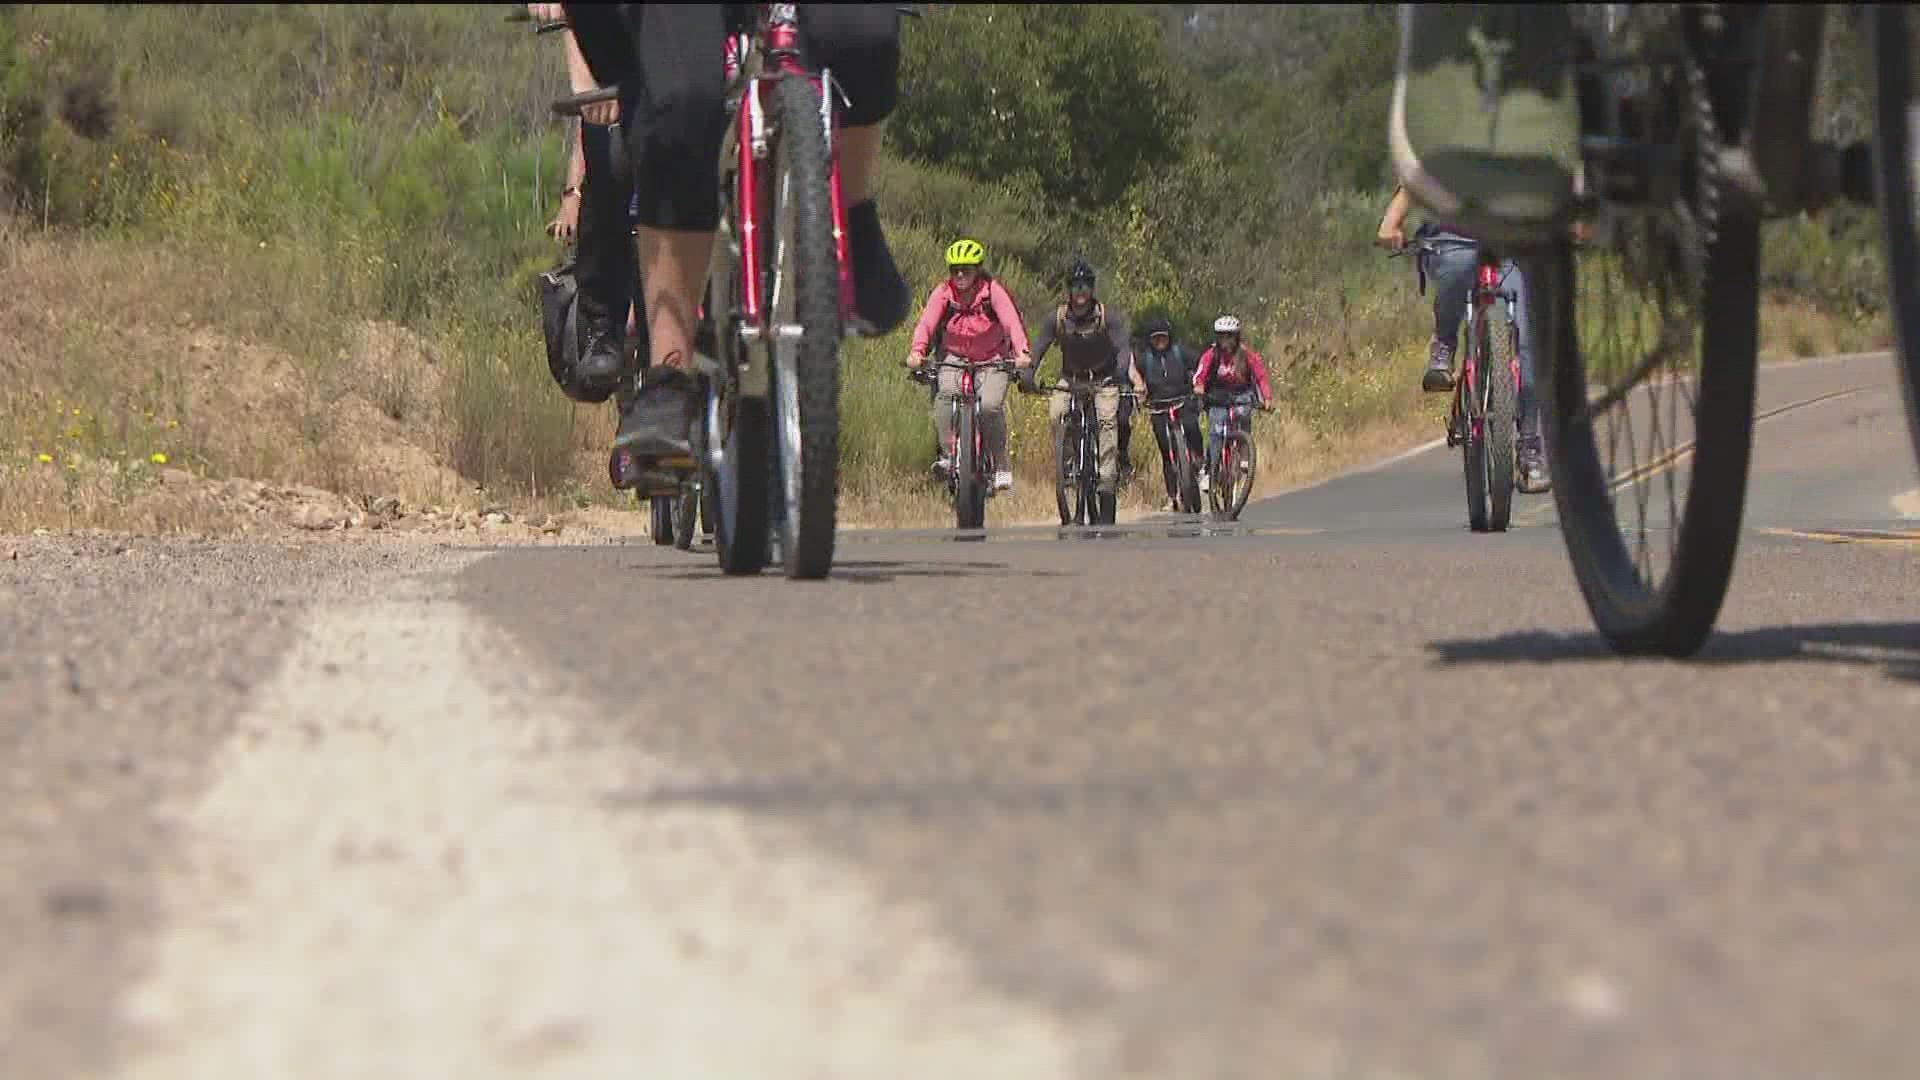 A few dozen riders took a bike tour in the Tijuana River Valley to see first hand the issues facing the border region.